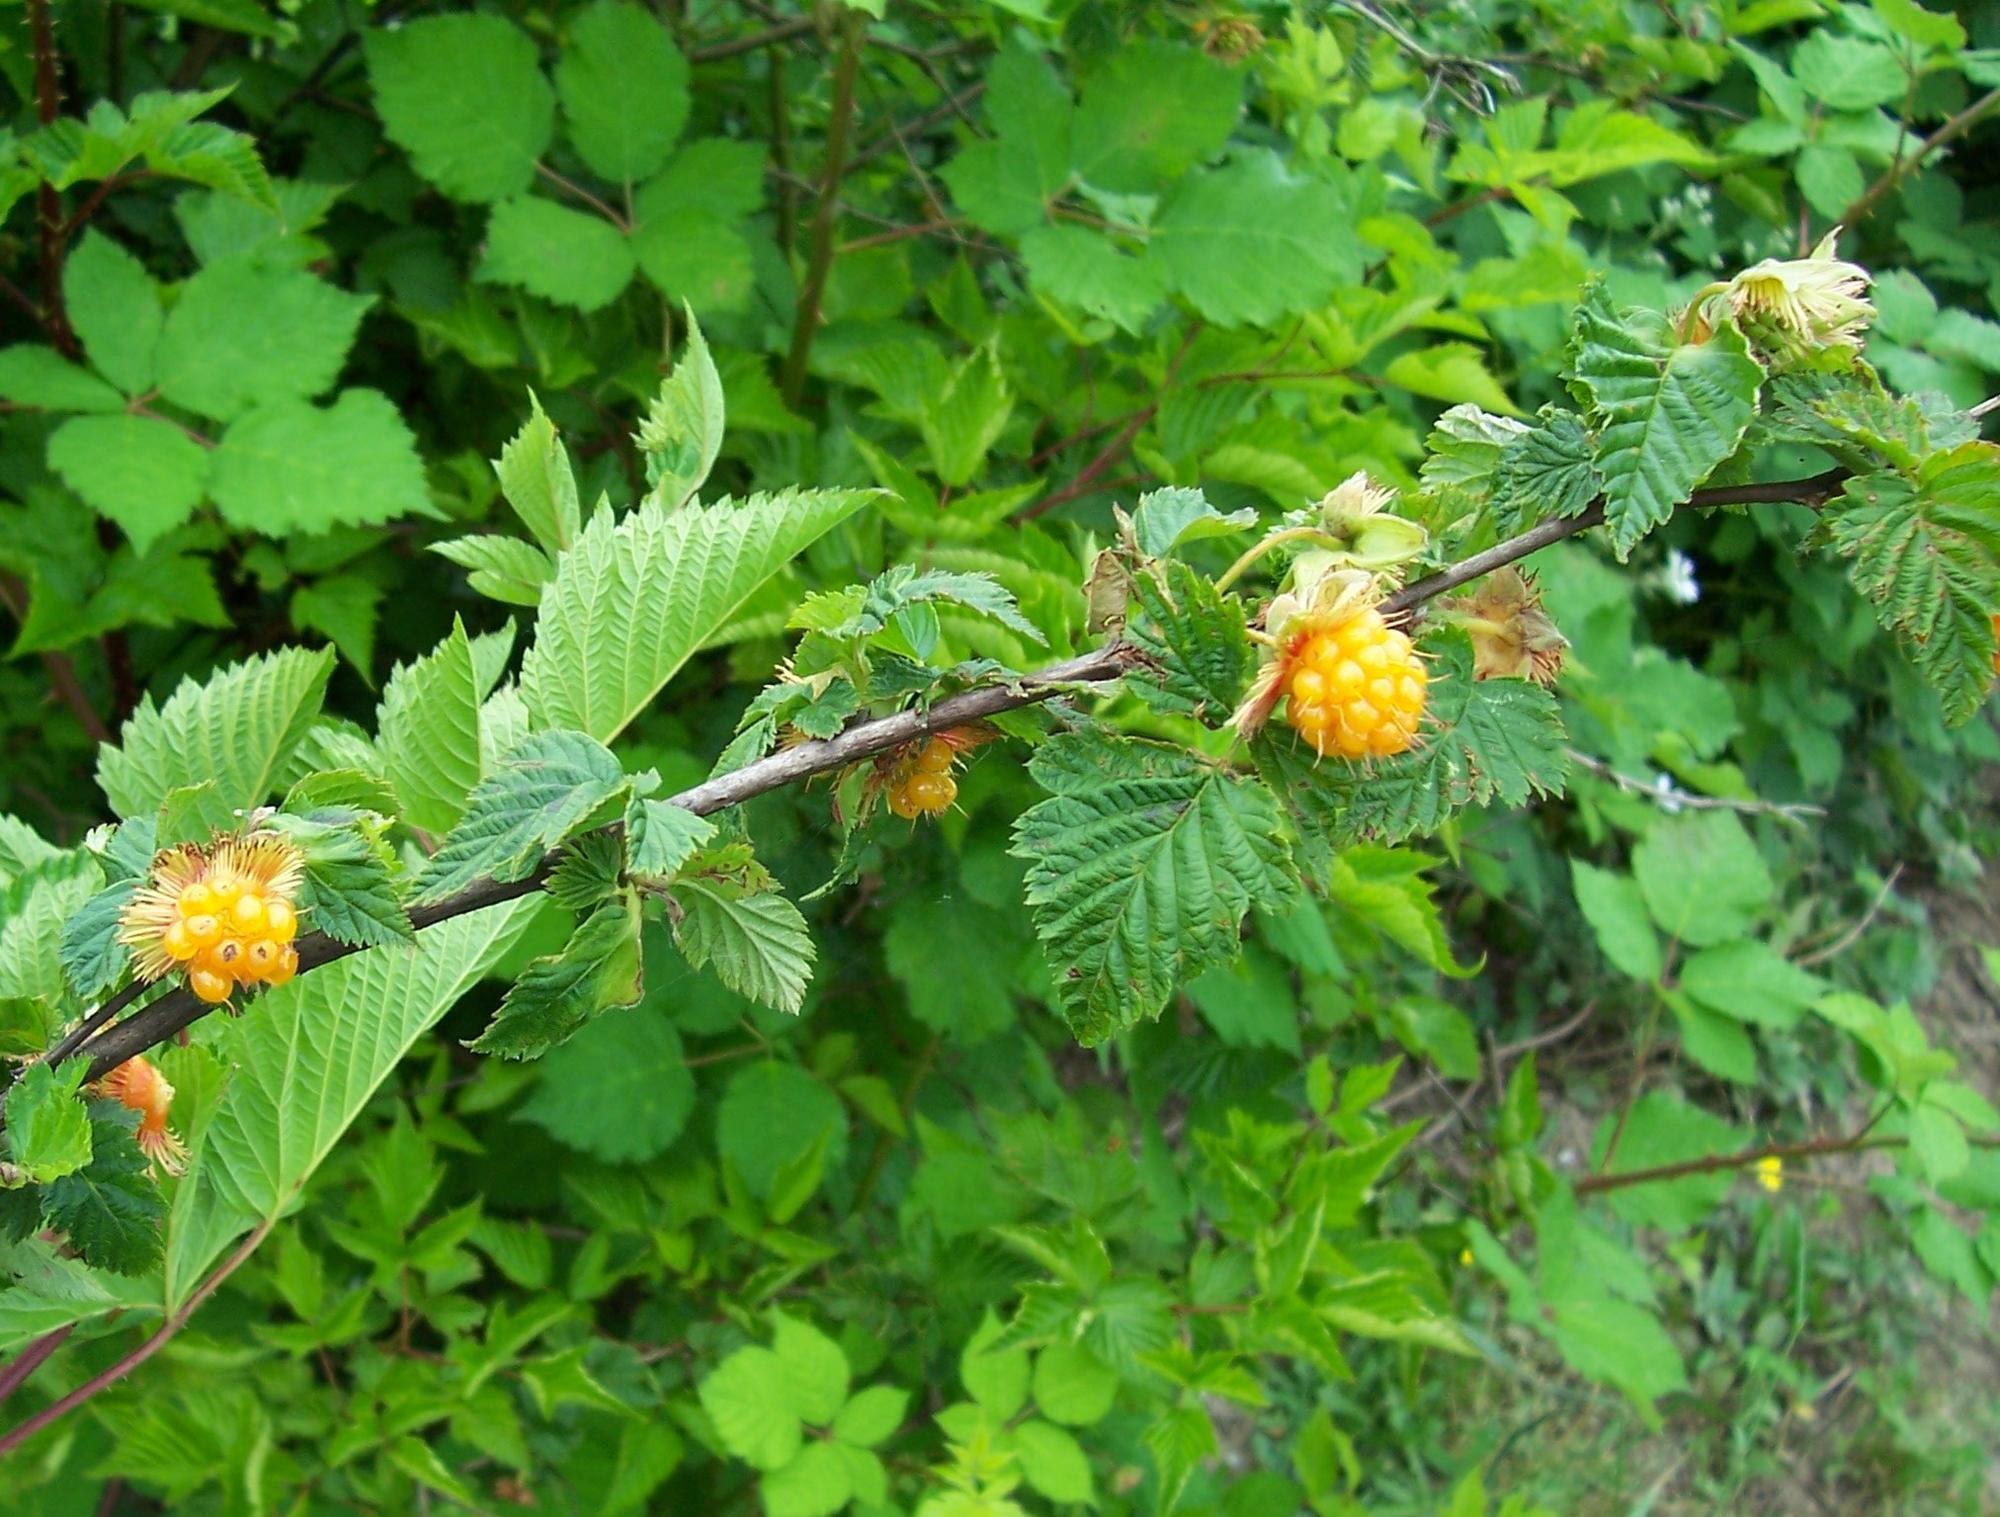 Growing Raspberries in Your Home Garden | OSU Extension Service